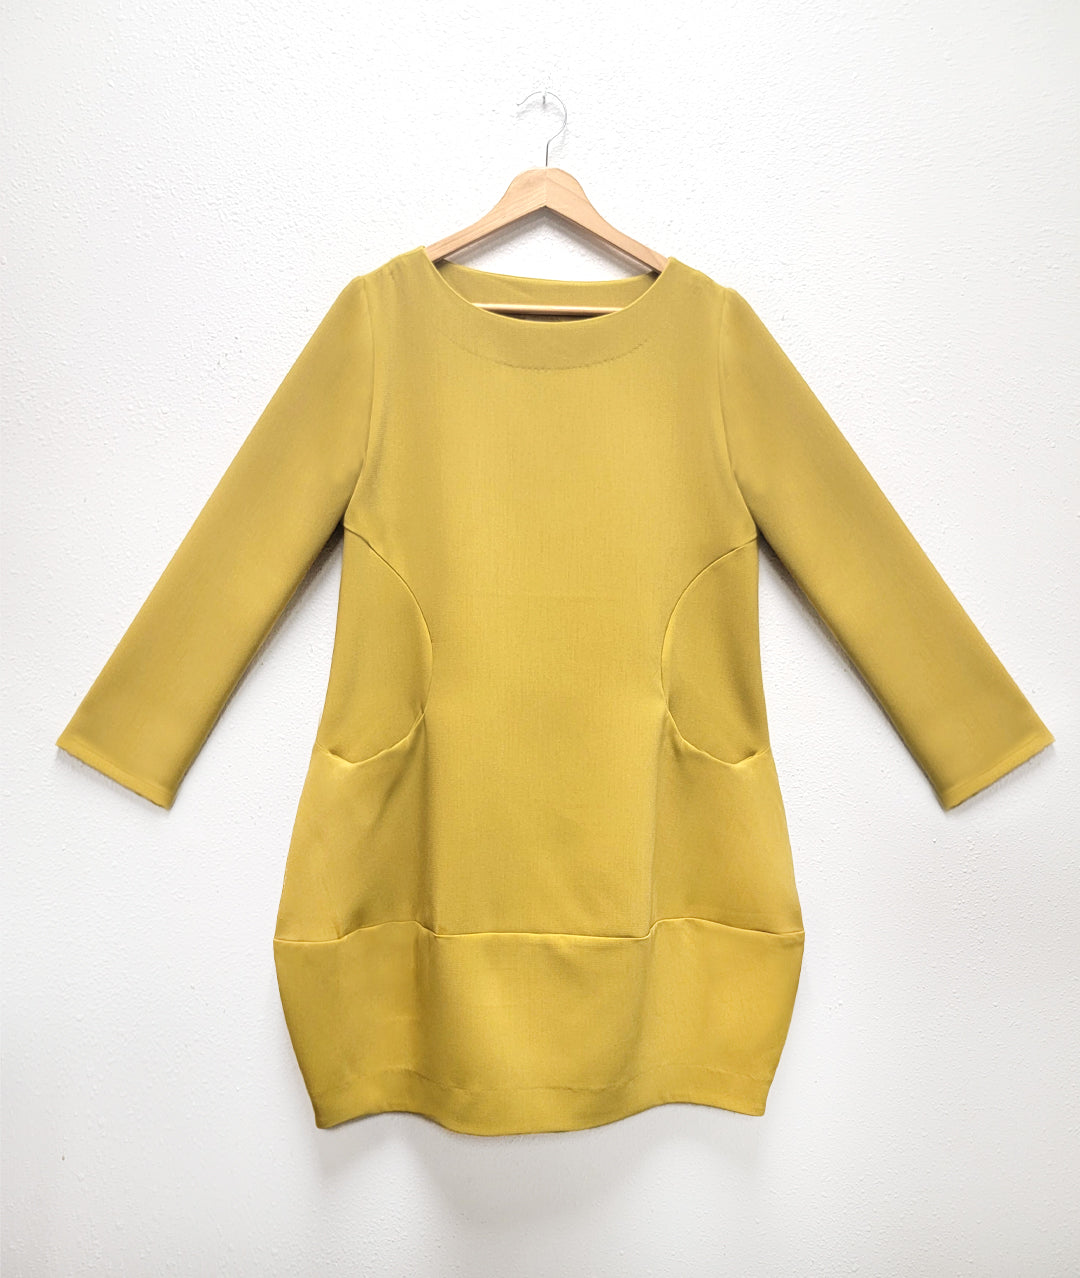 gold tunic with a wide bottom hem, 3/4 sleeves, and round seams at the waist with set in pockets